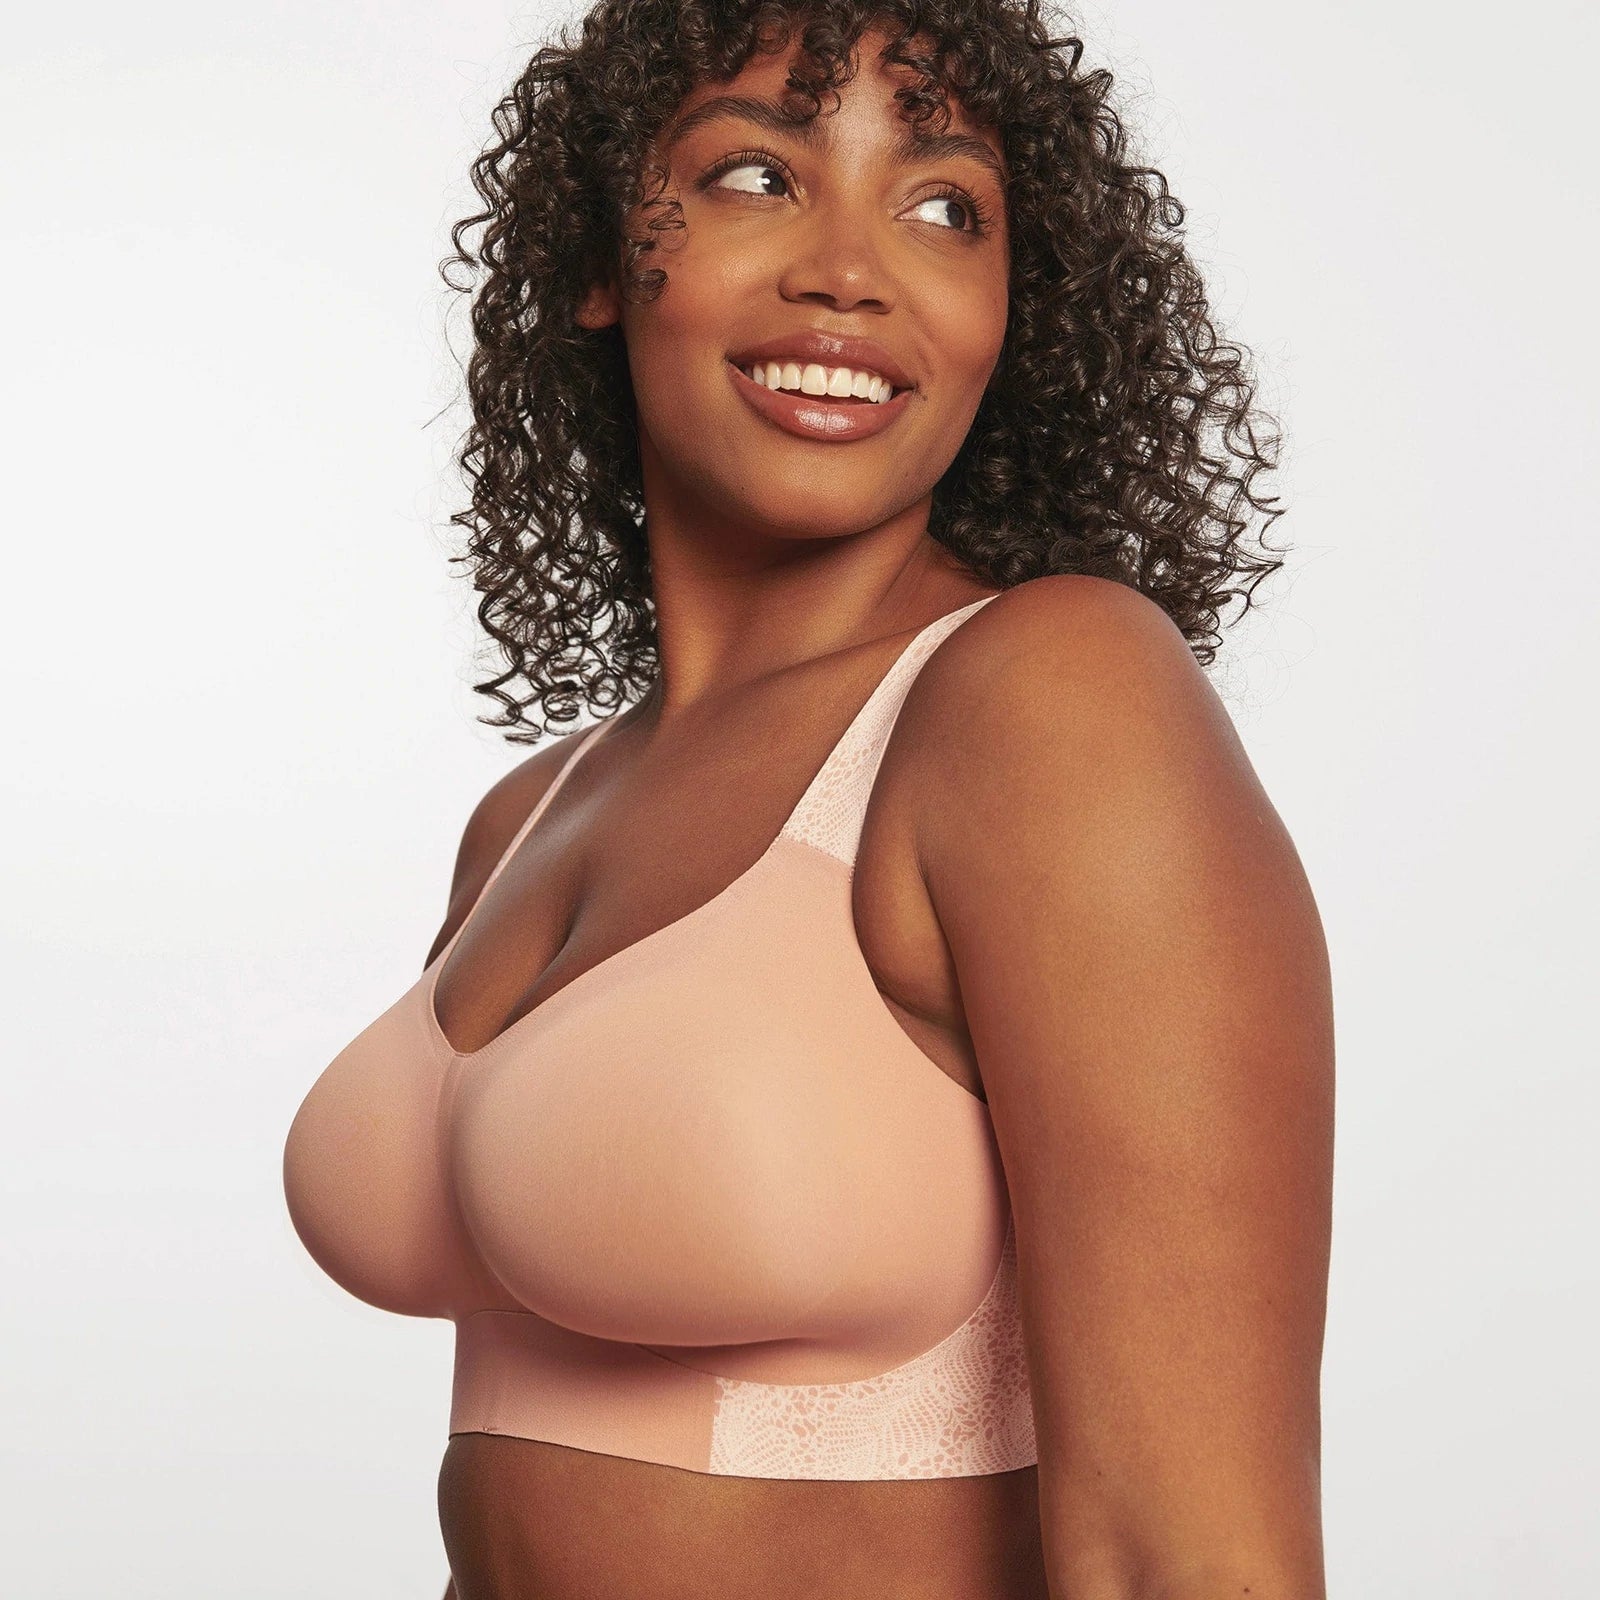 Kayser Lingerie - Add 2 cup sizes with this 5⭐️ bra! Shop now for only  $34.95! ​ ​ ​The best bra, my go to bra! I've bought 7 of these bras and